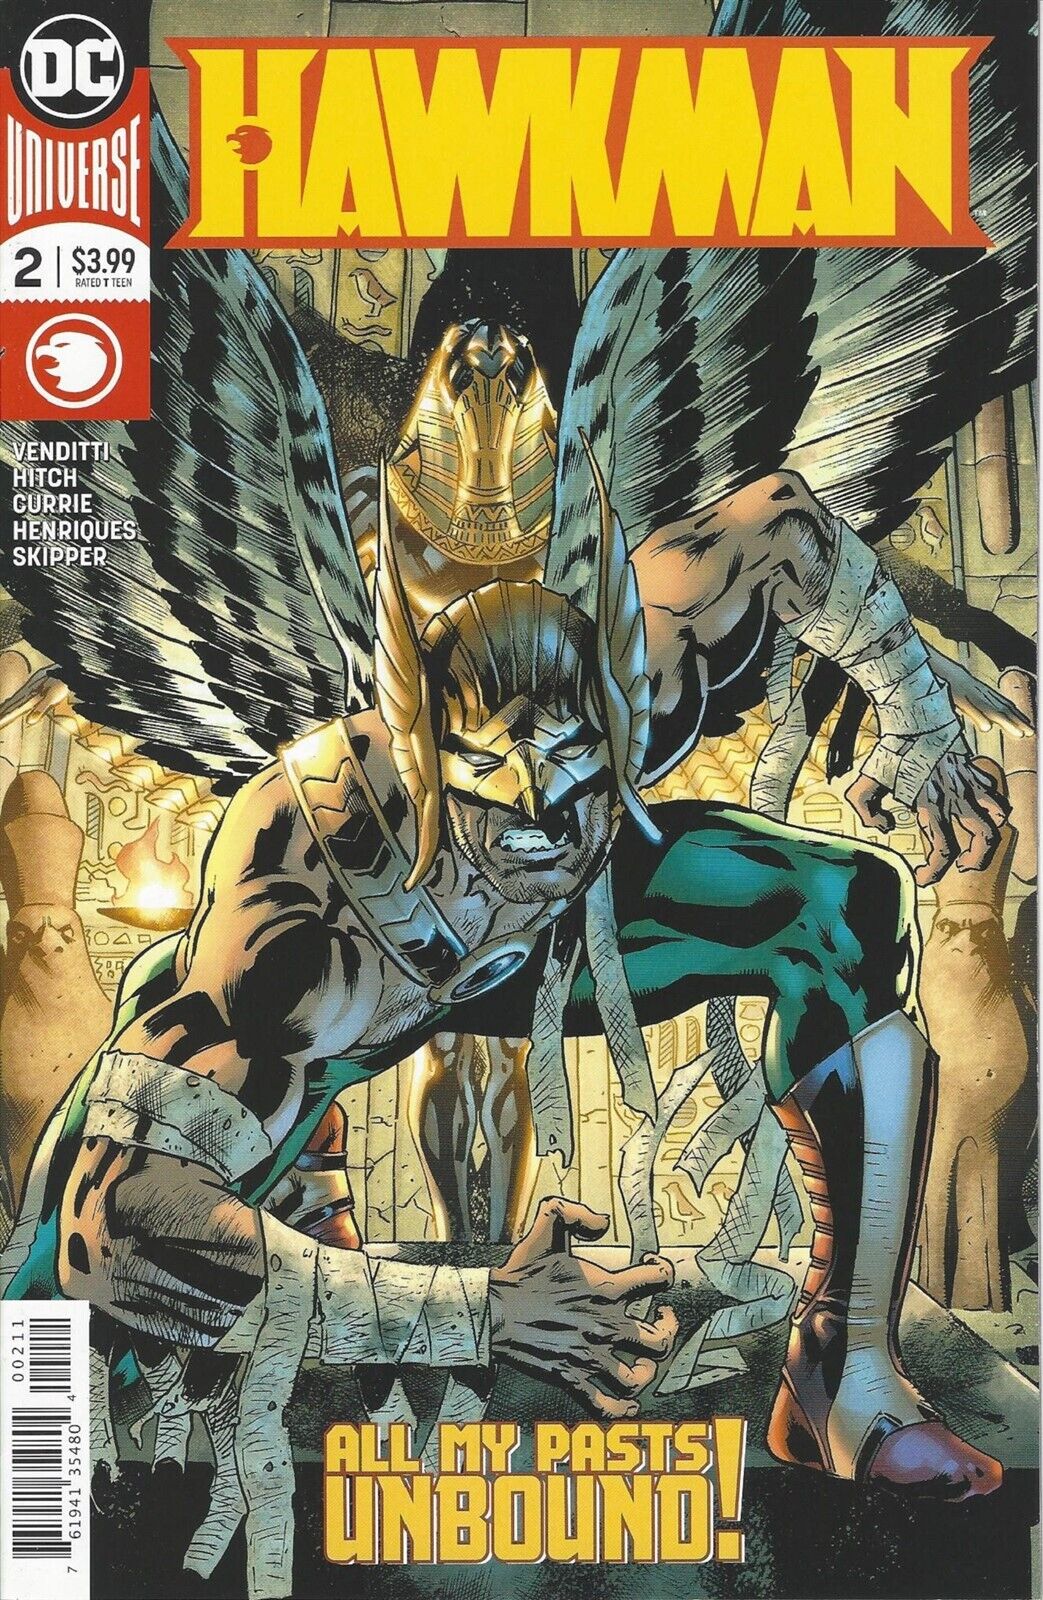 Hawkman #2 All My Pasts Unbound